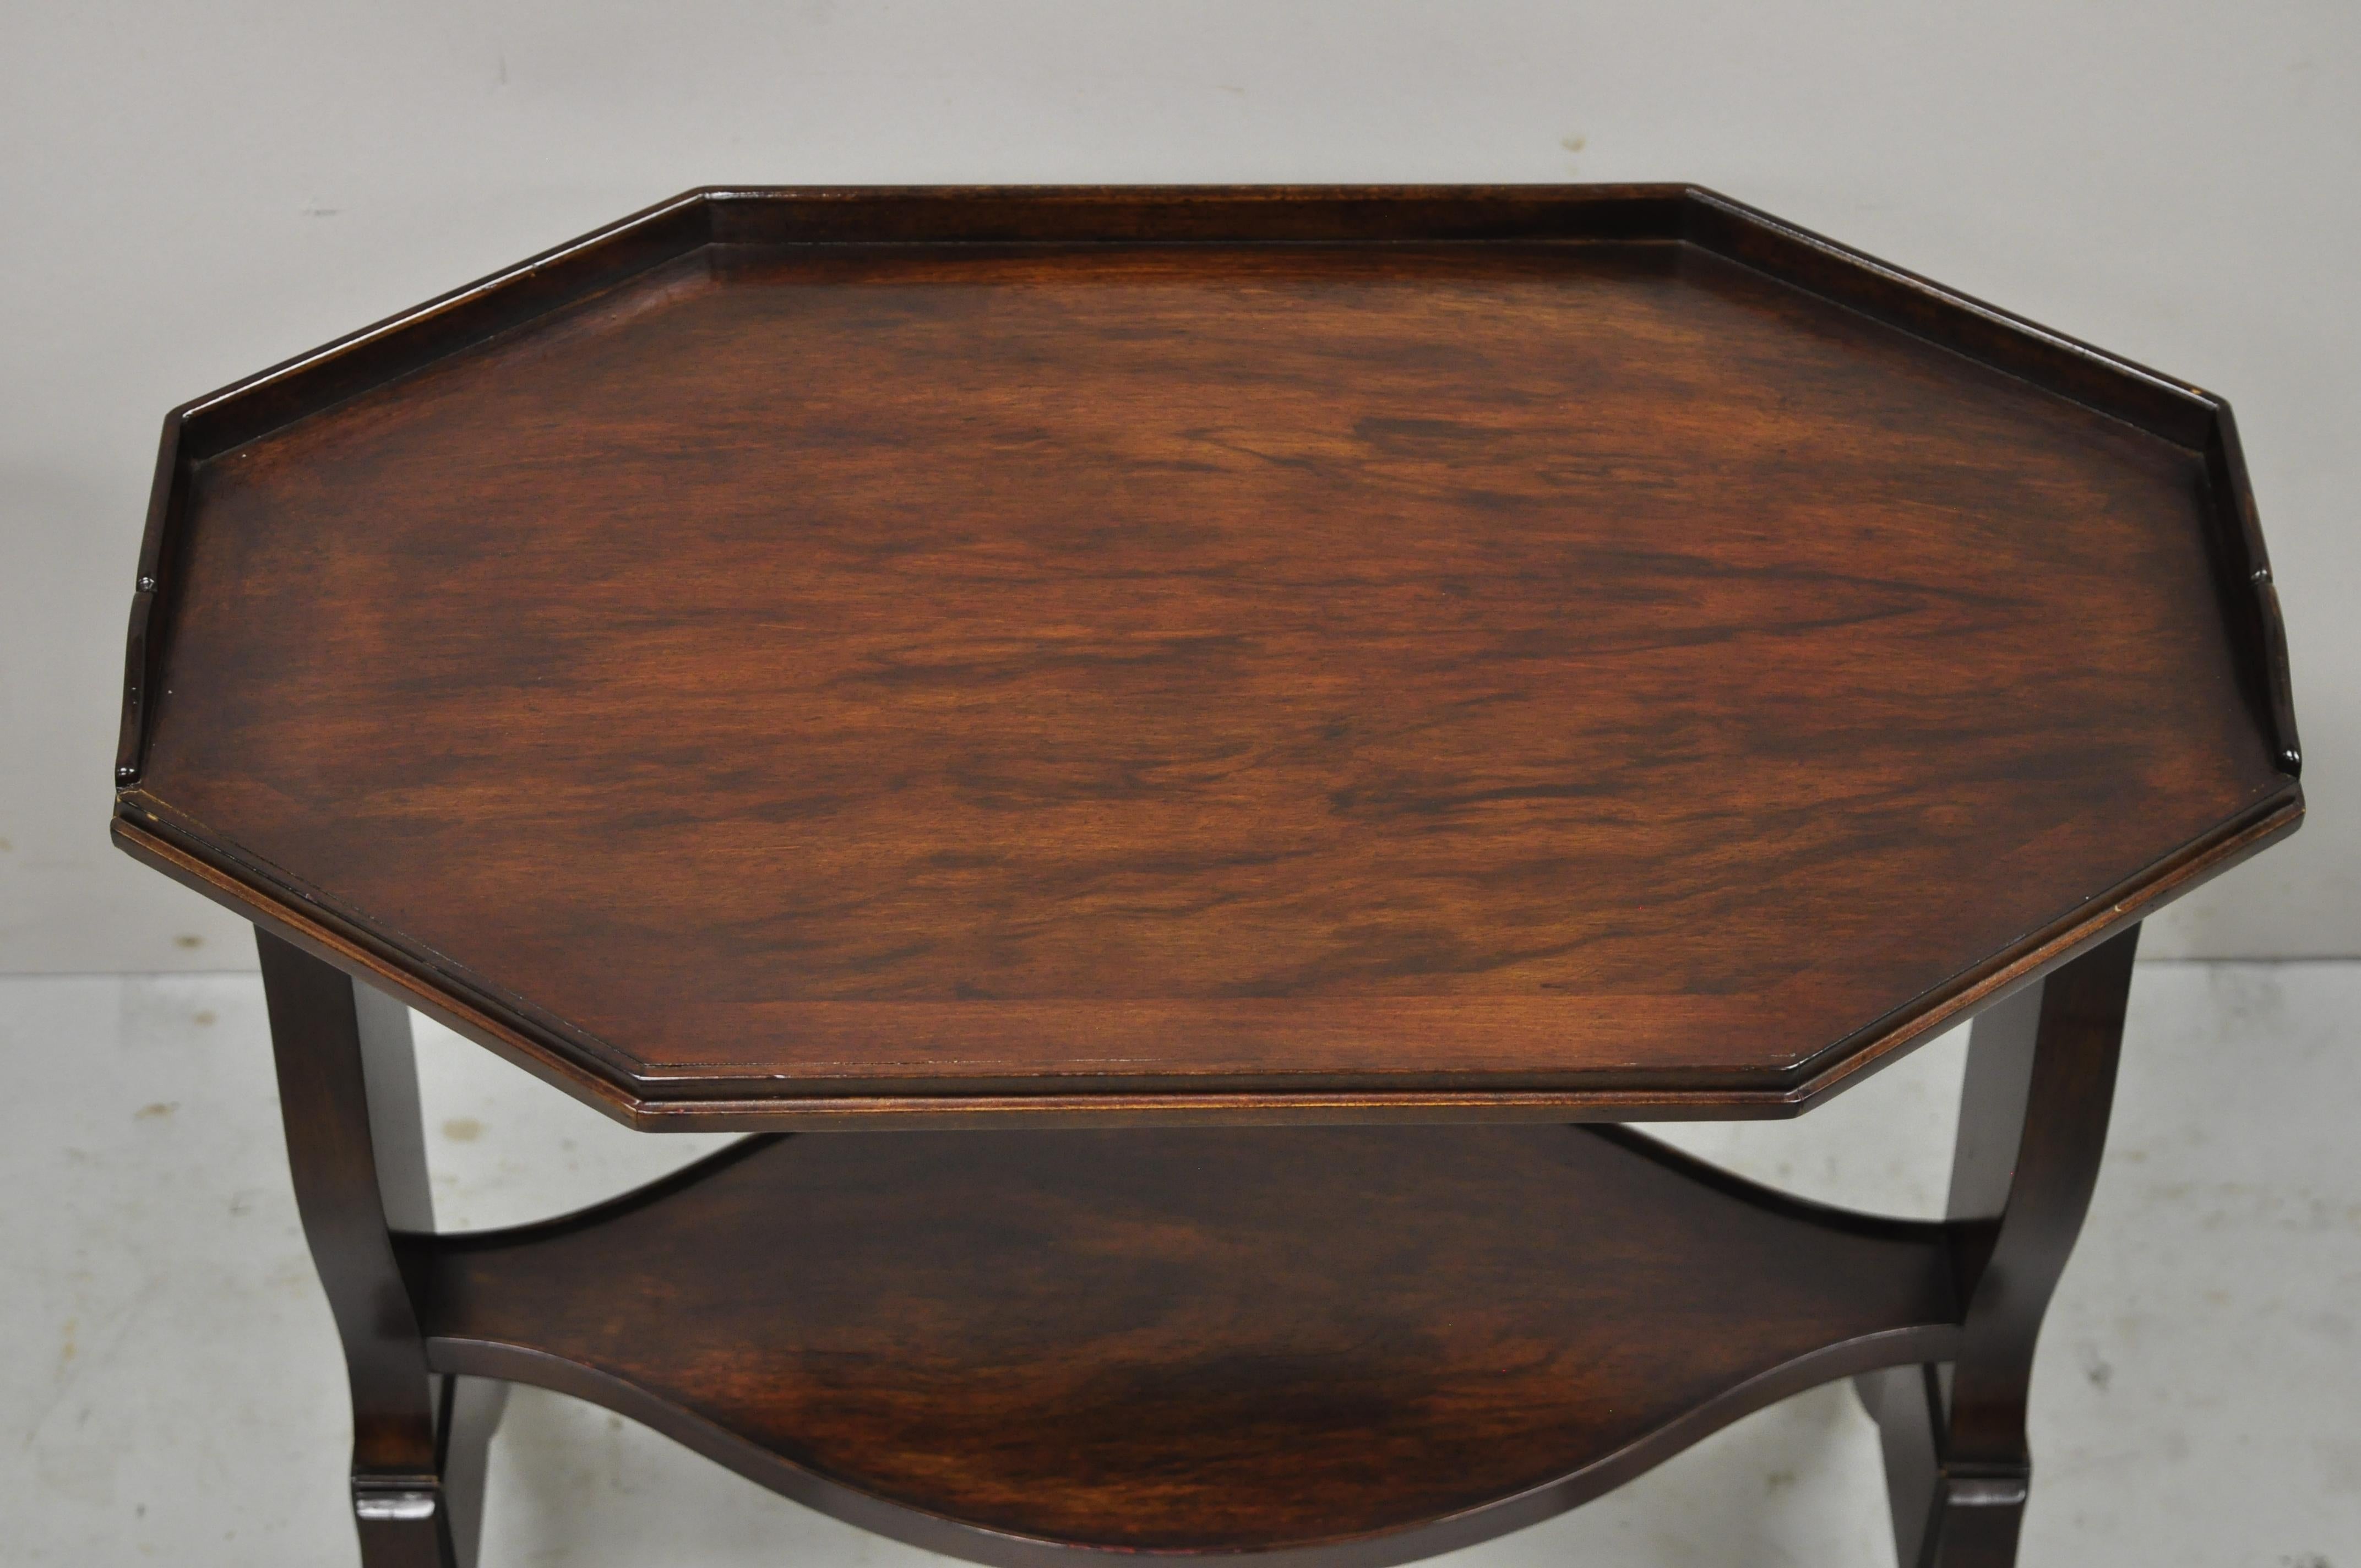 North American Antique John Widdicomb Mahogany Sheraton Style 2 Tier Accent Side Lamp End Table